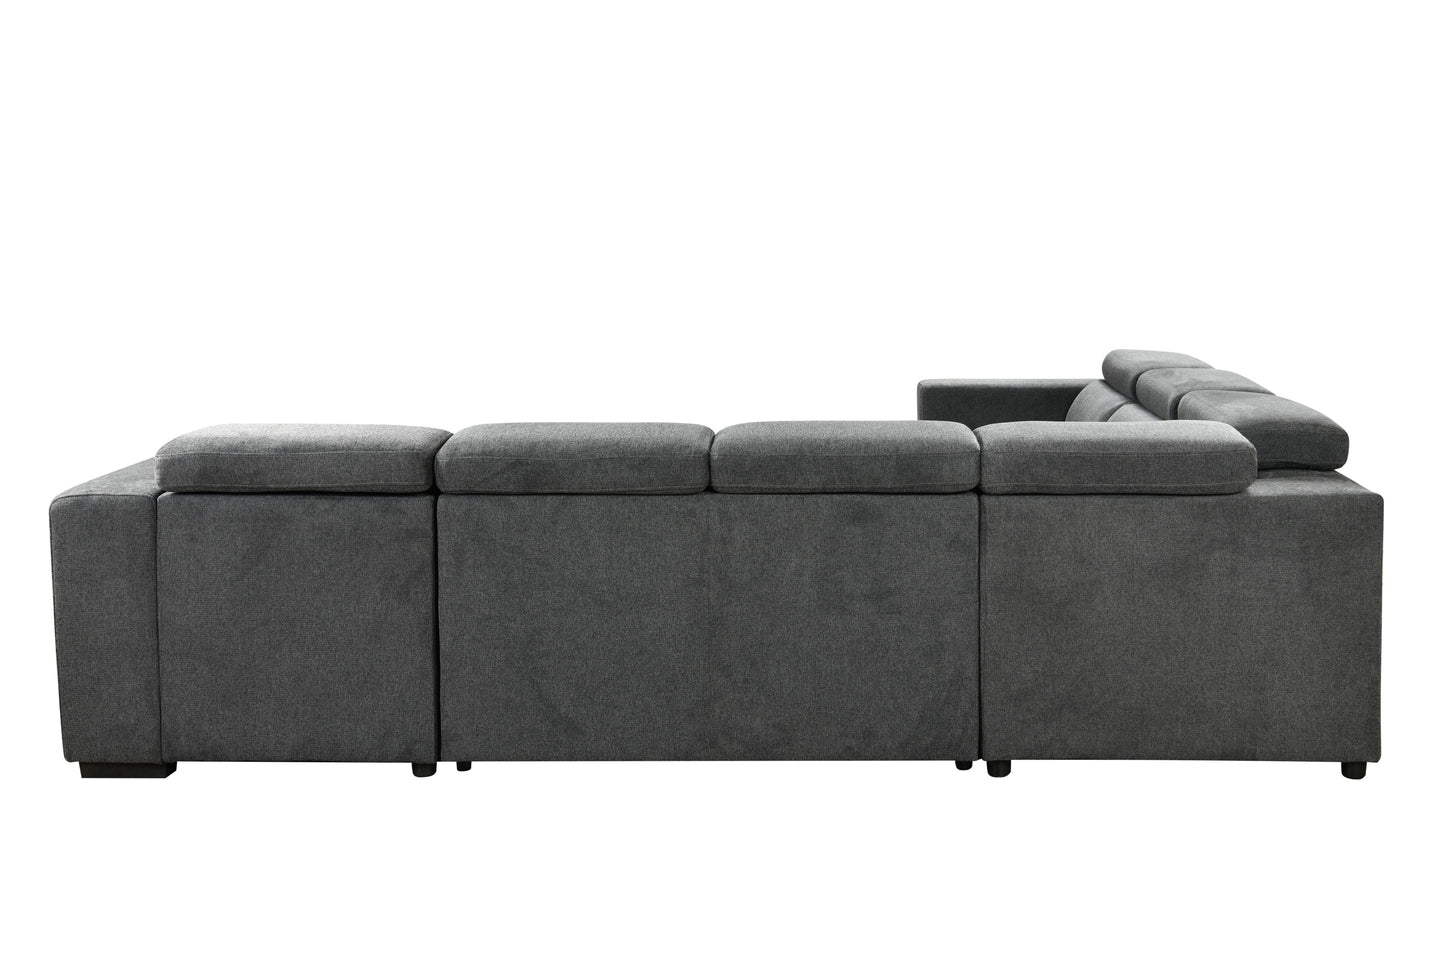 4 in 1 Modern U-Shaped 7-seat Sectional Sofa Couch with Adjustable Headrest, Sofa Bed with Storage Chaise,Pull Out Couch Bed for Living Room ,Dark Gray